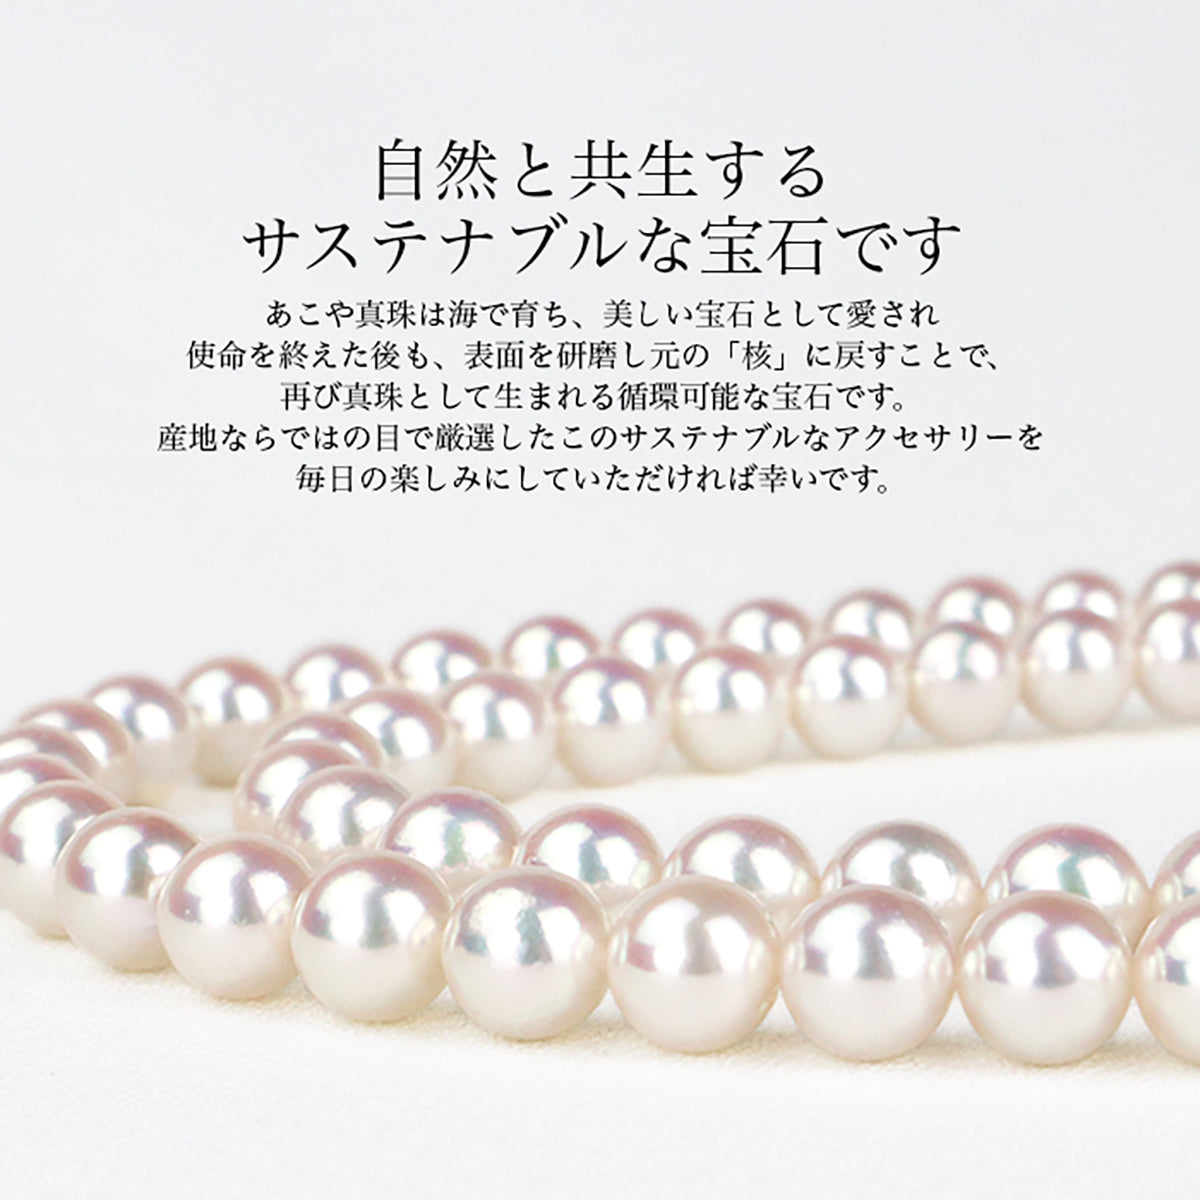 [Natural White] [Hanadama Pearl] Uncolored Formal Necklace Set of 2 [7.5-8.0mm] (Earrings/Earrings) Akoya Pearl Certificate of Authenticity with Storage Case for Ceremonial Occasions